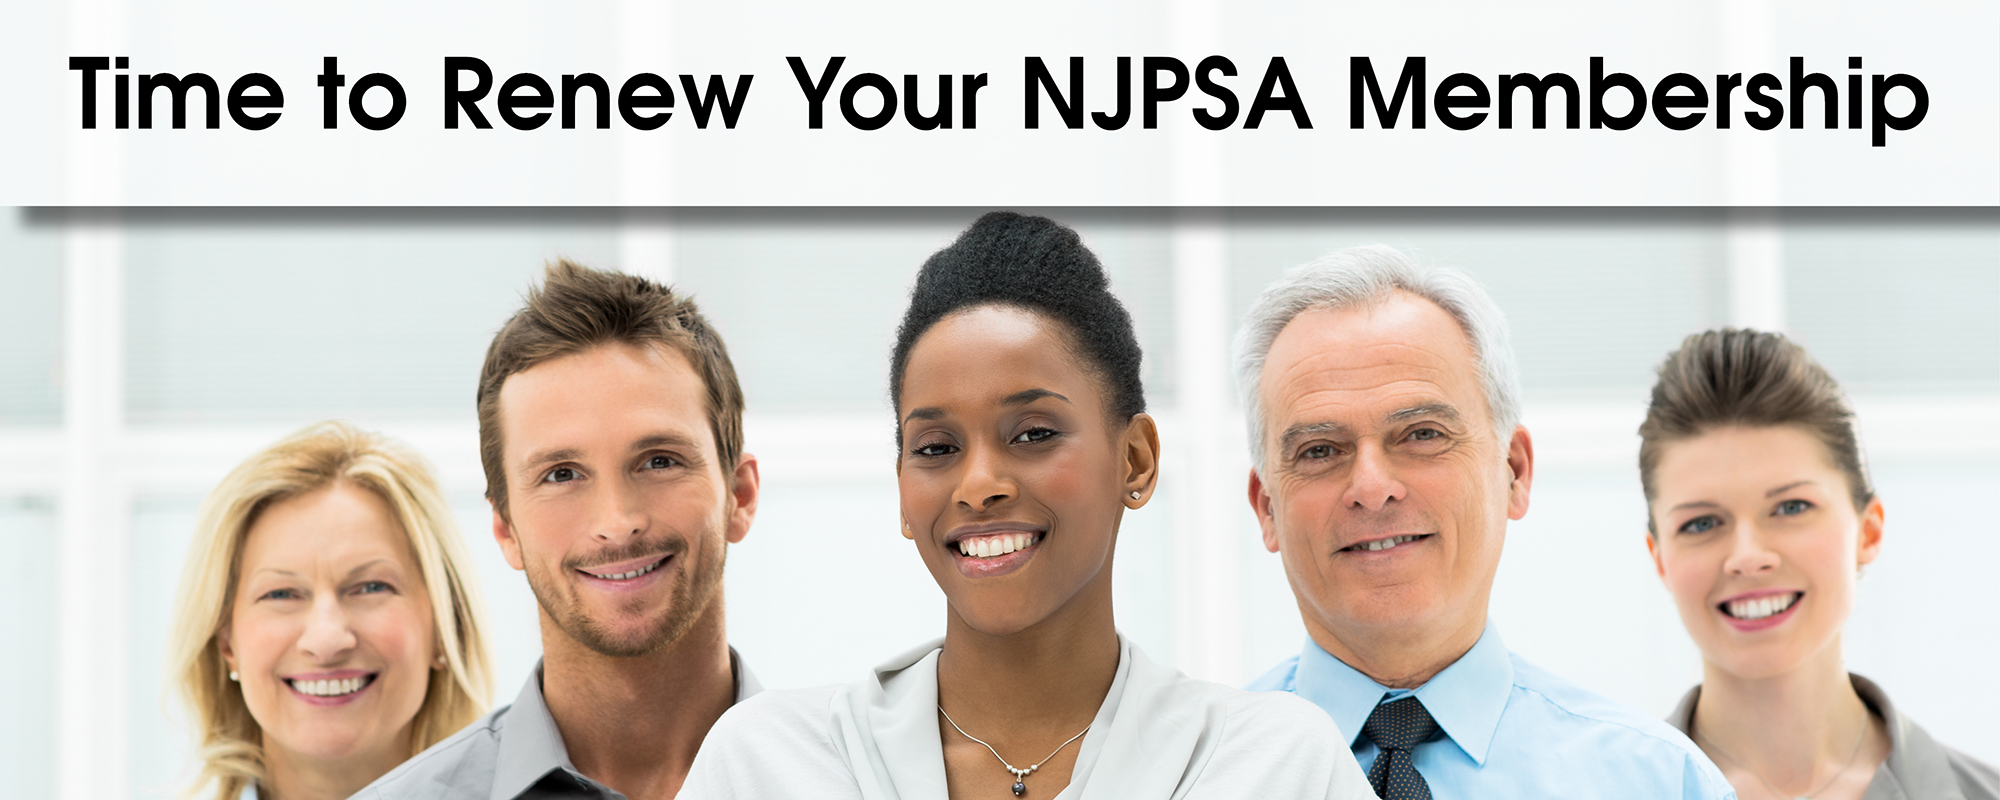 Renew Your NJPSA Membership Before the New Term Begins on July 1